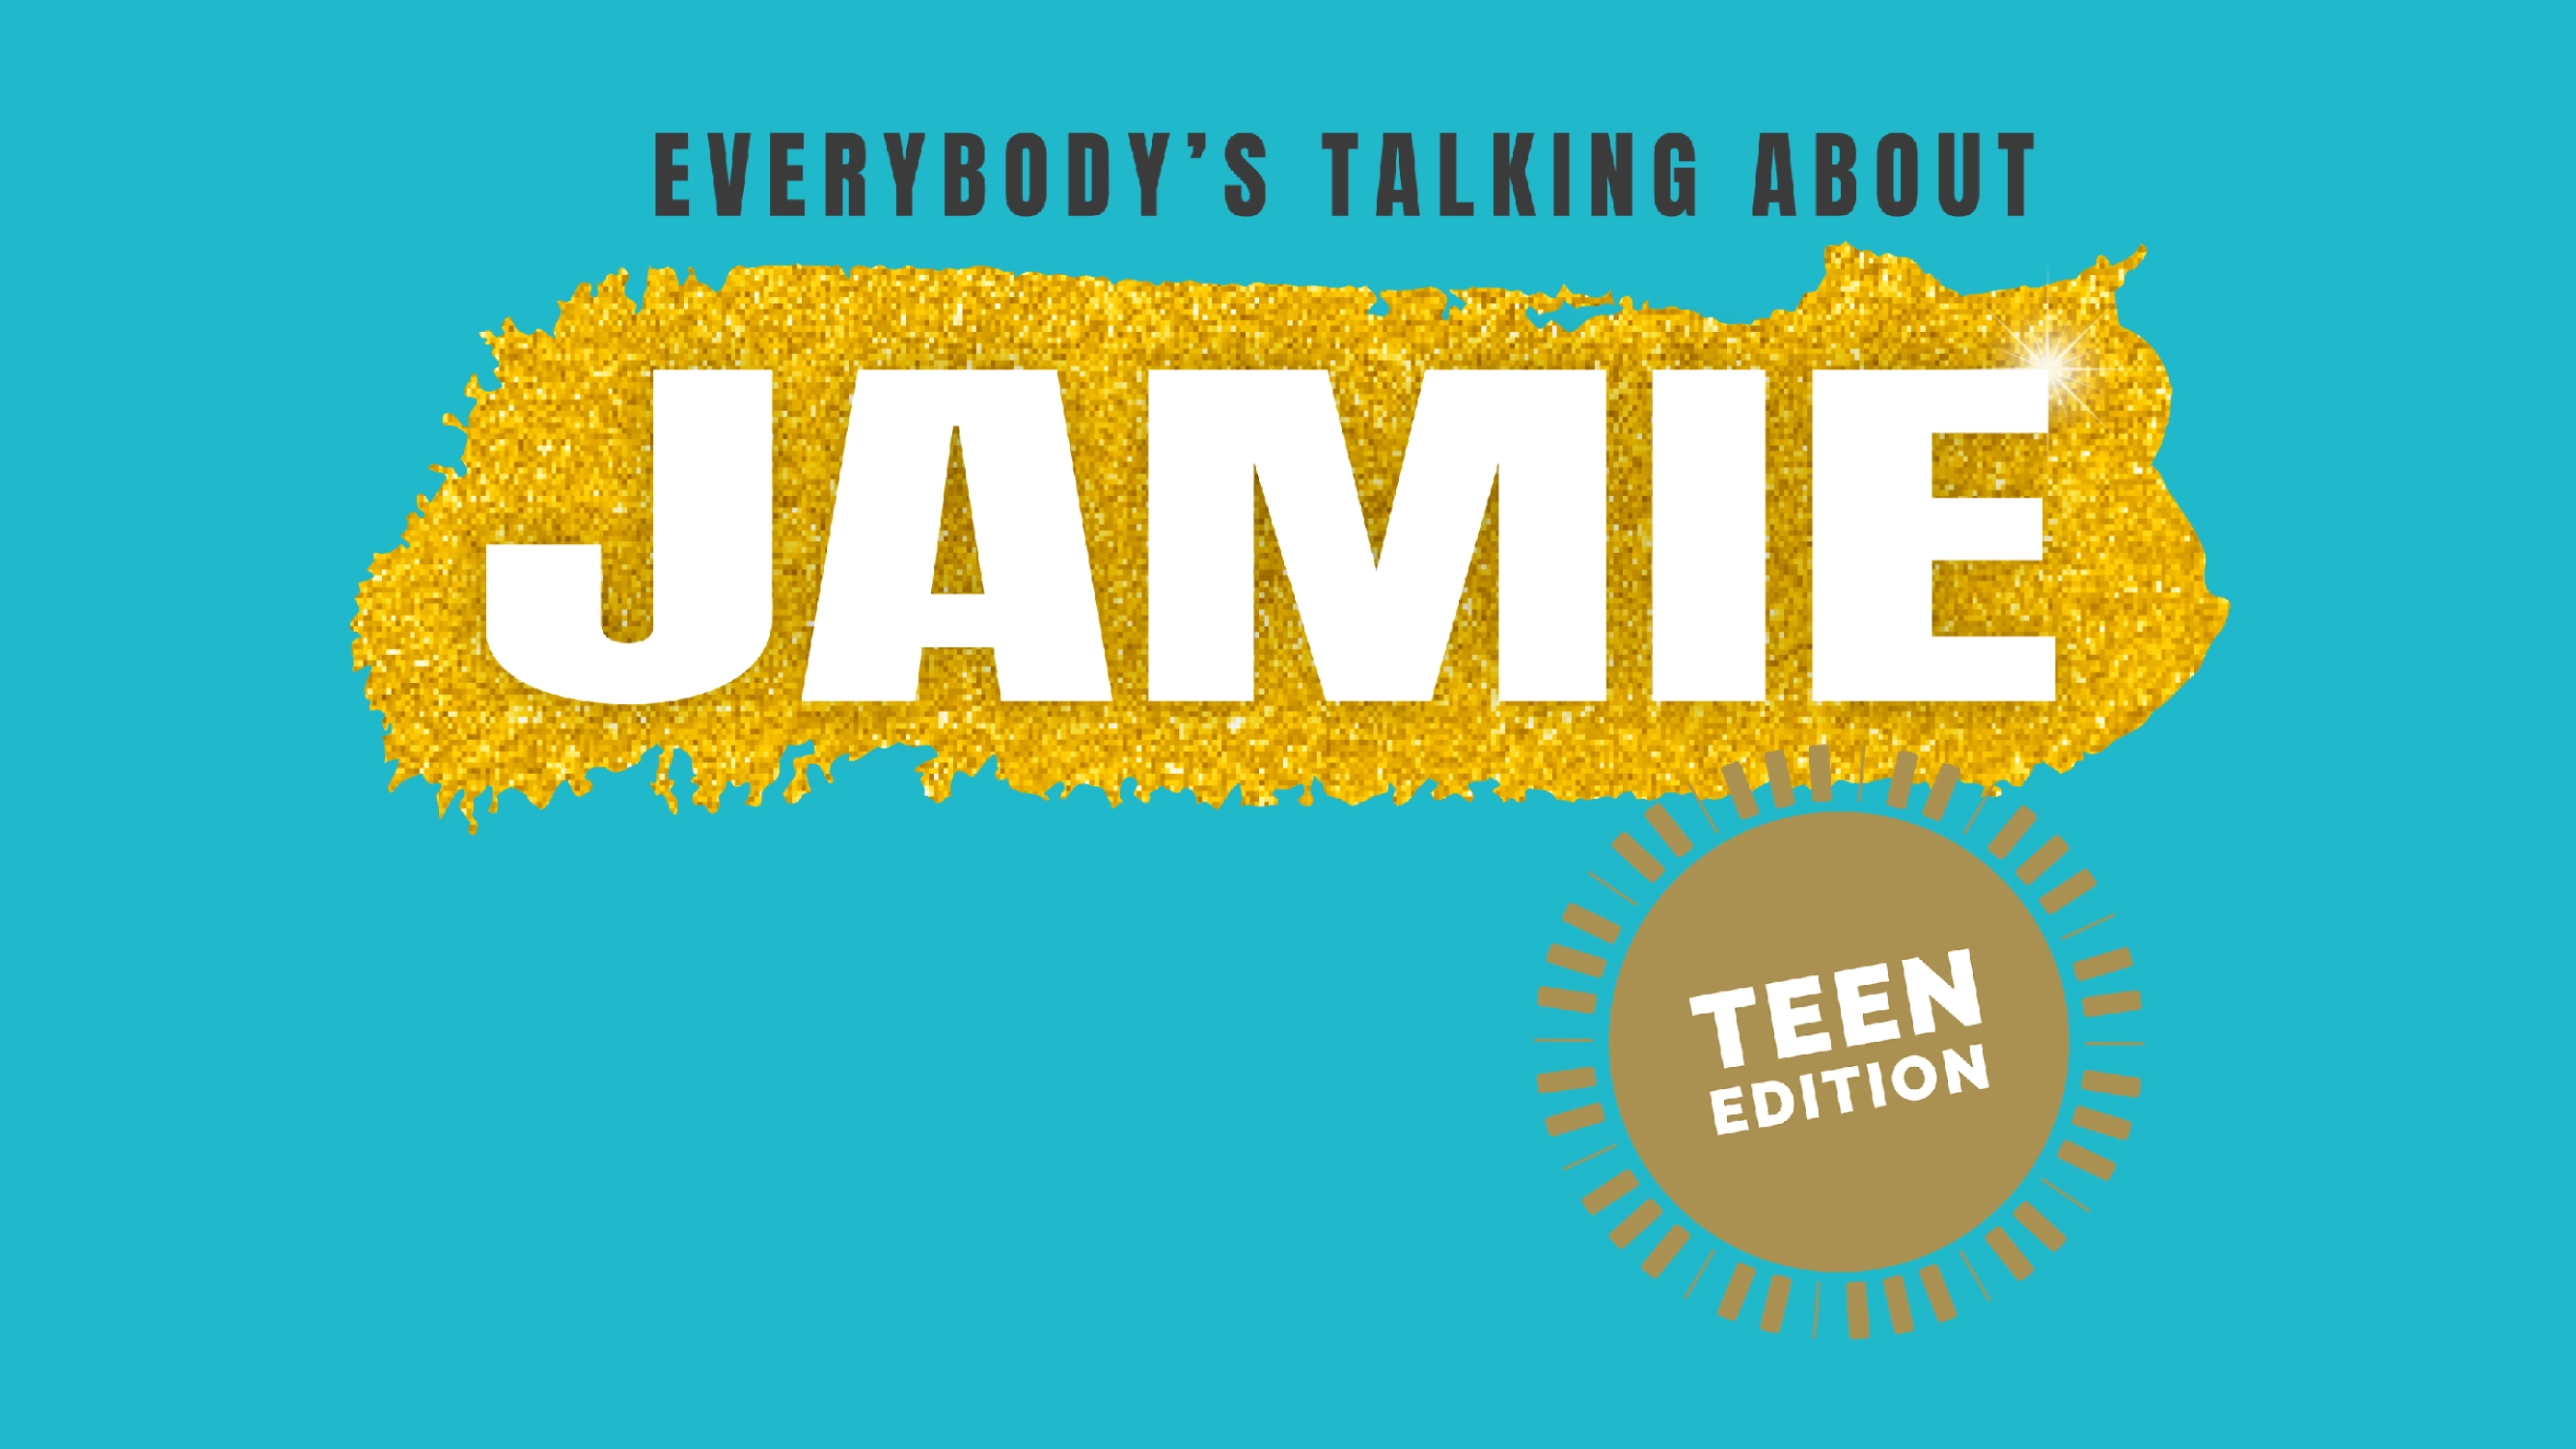 Weston College Performing Arts presents Everybody's Talking About Jamie Teen Edition